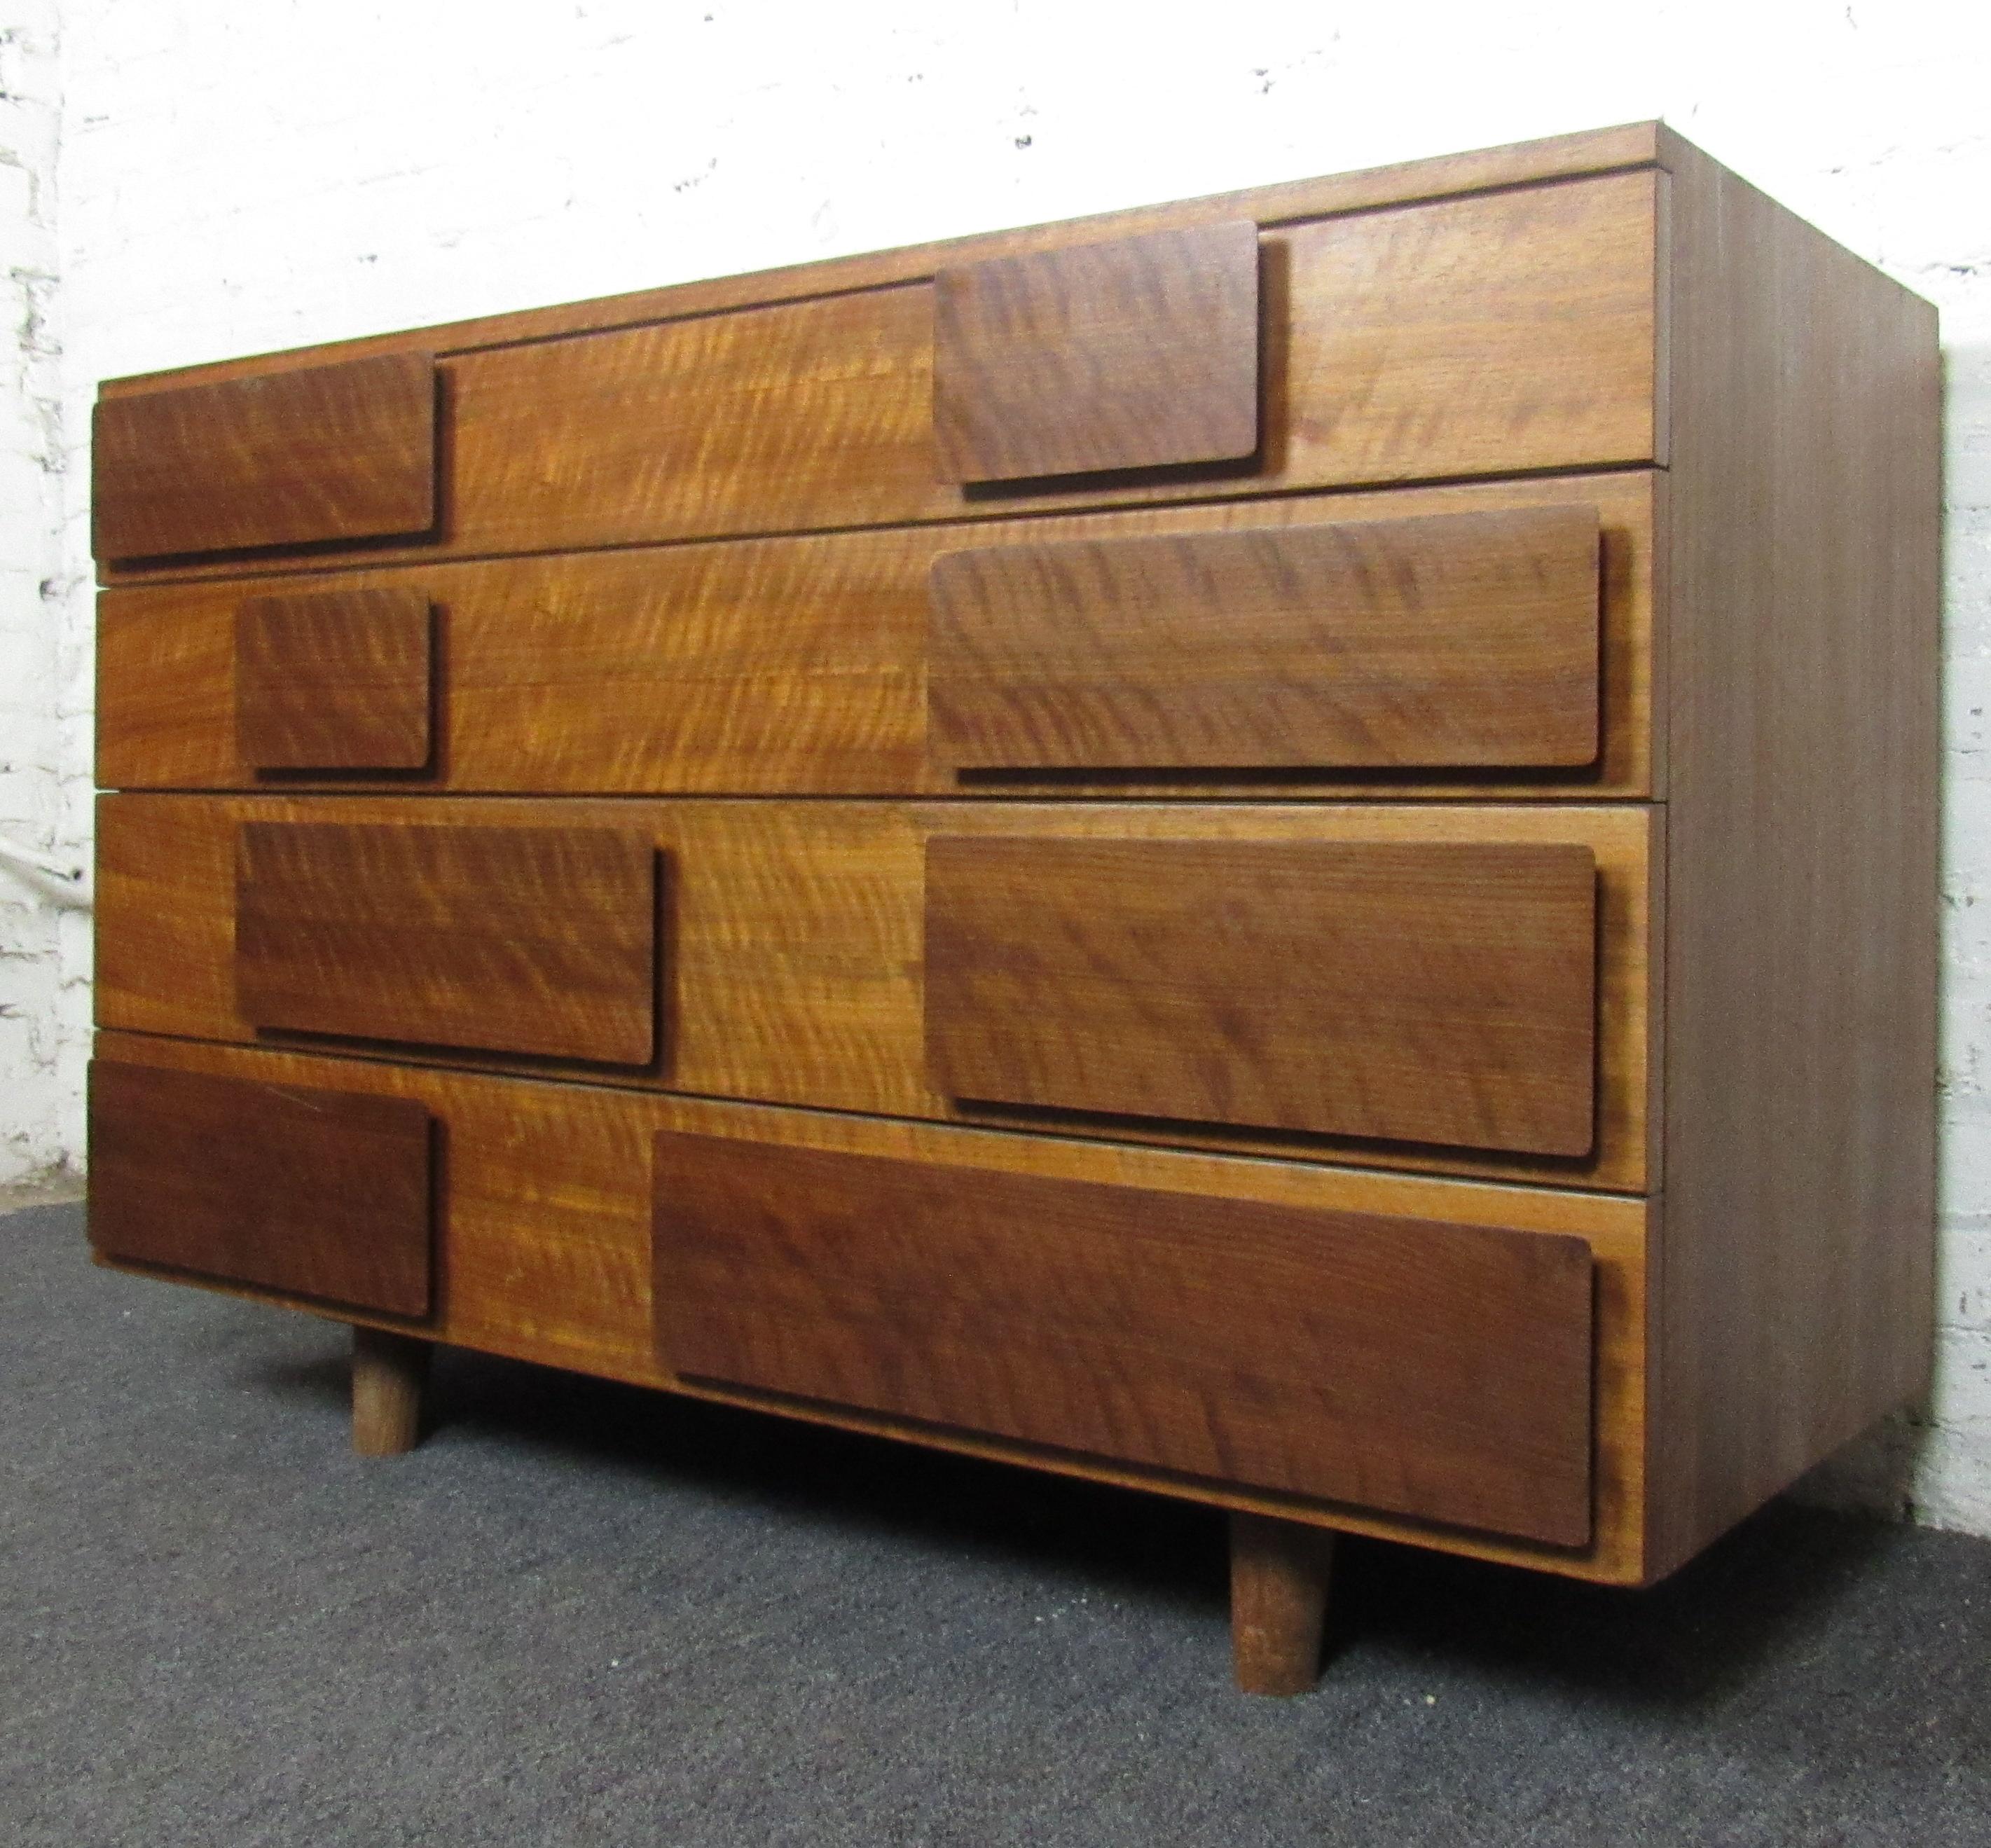 Mid-Century Modern dresser with geometric designed front. Beautifully grained with four wide drawers and tapered legs.
Location: Brooklyn NY.